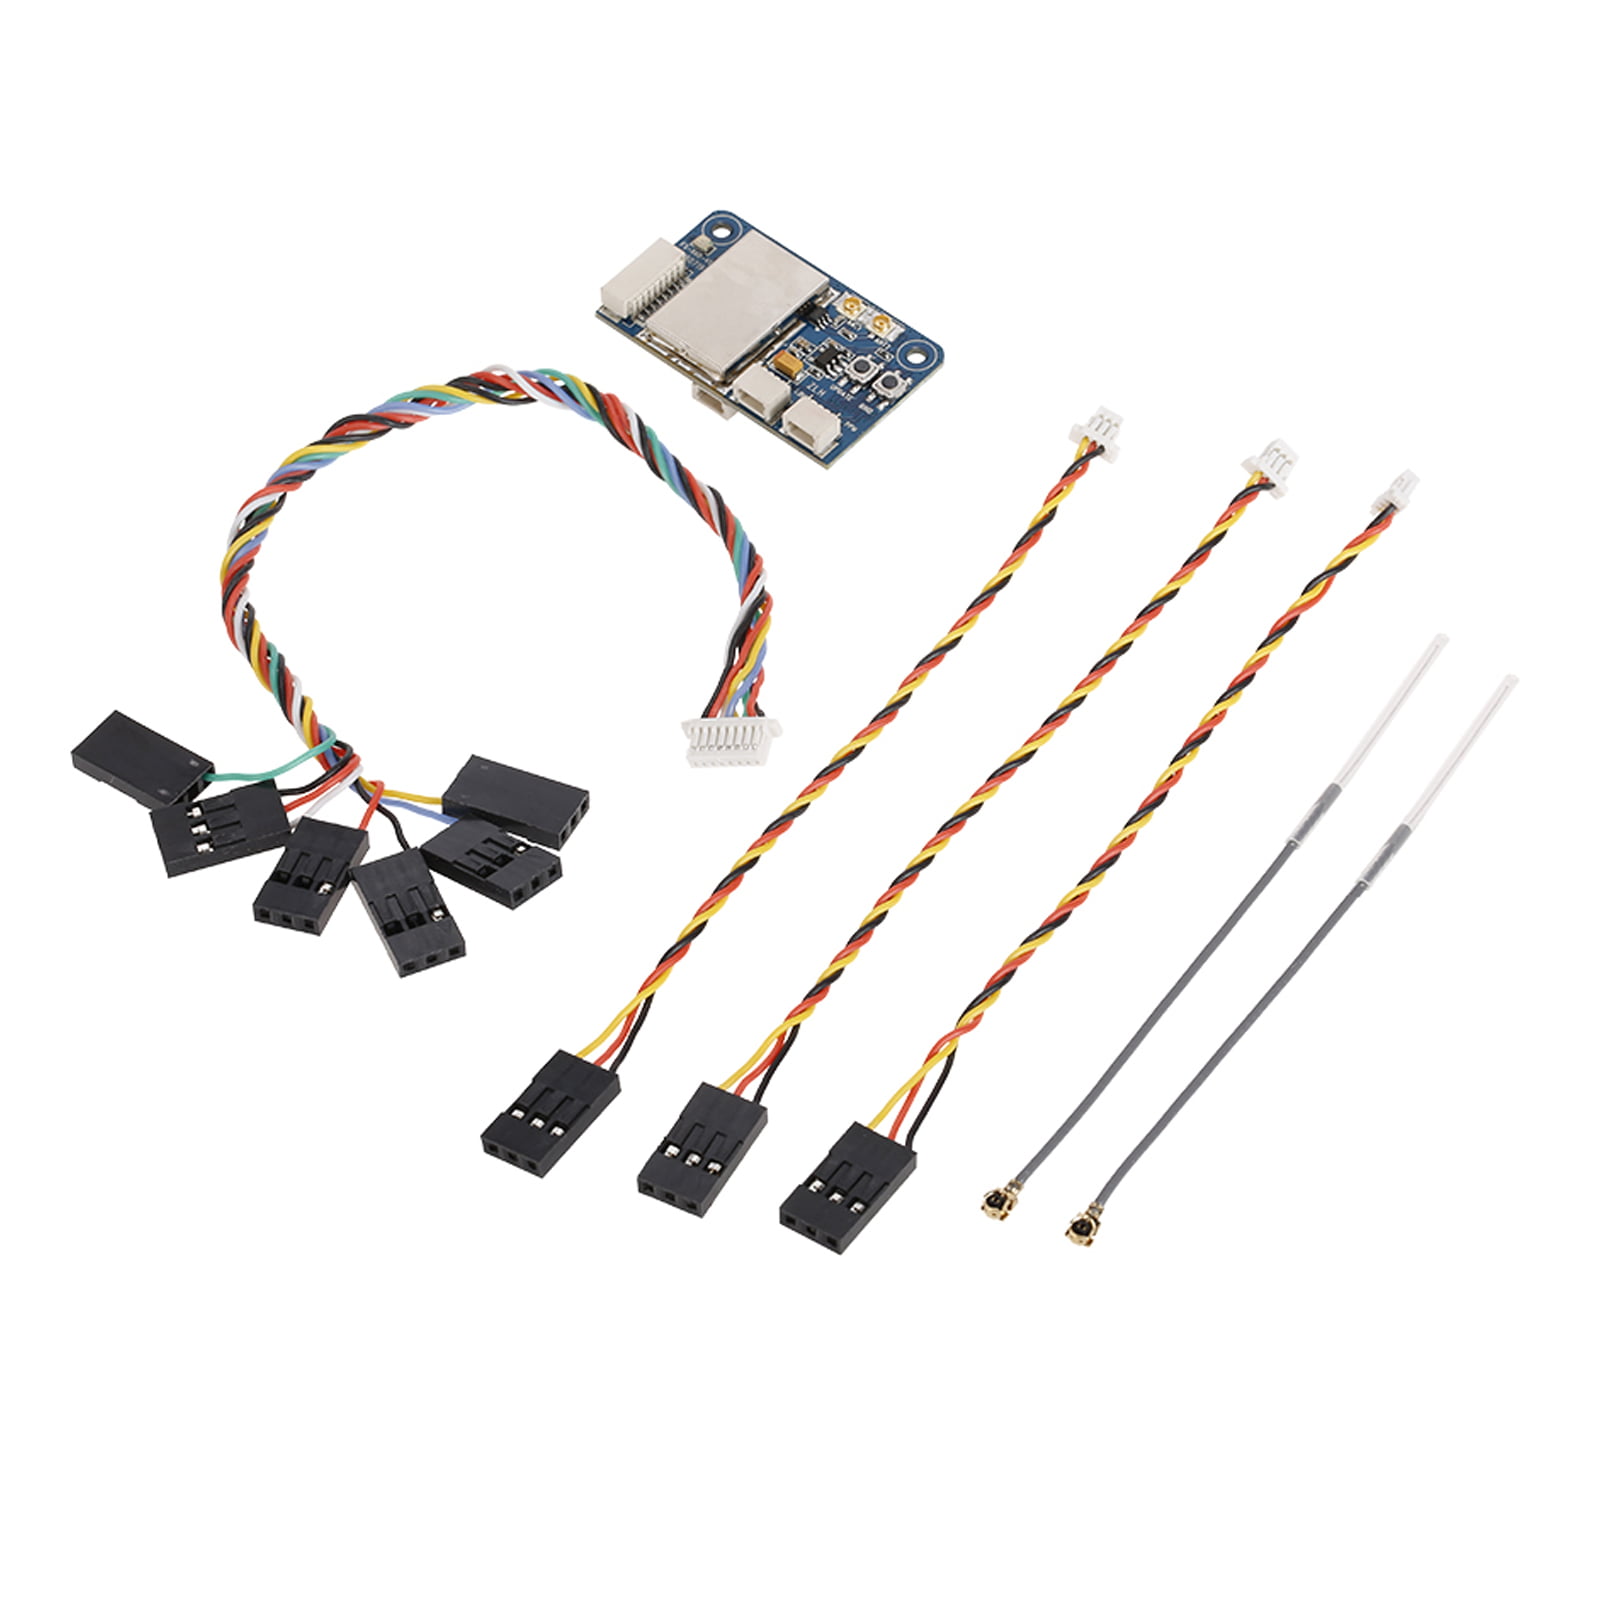 Tomshine X6B Receiver for Racing Drones